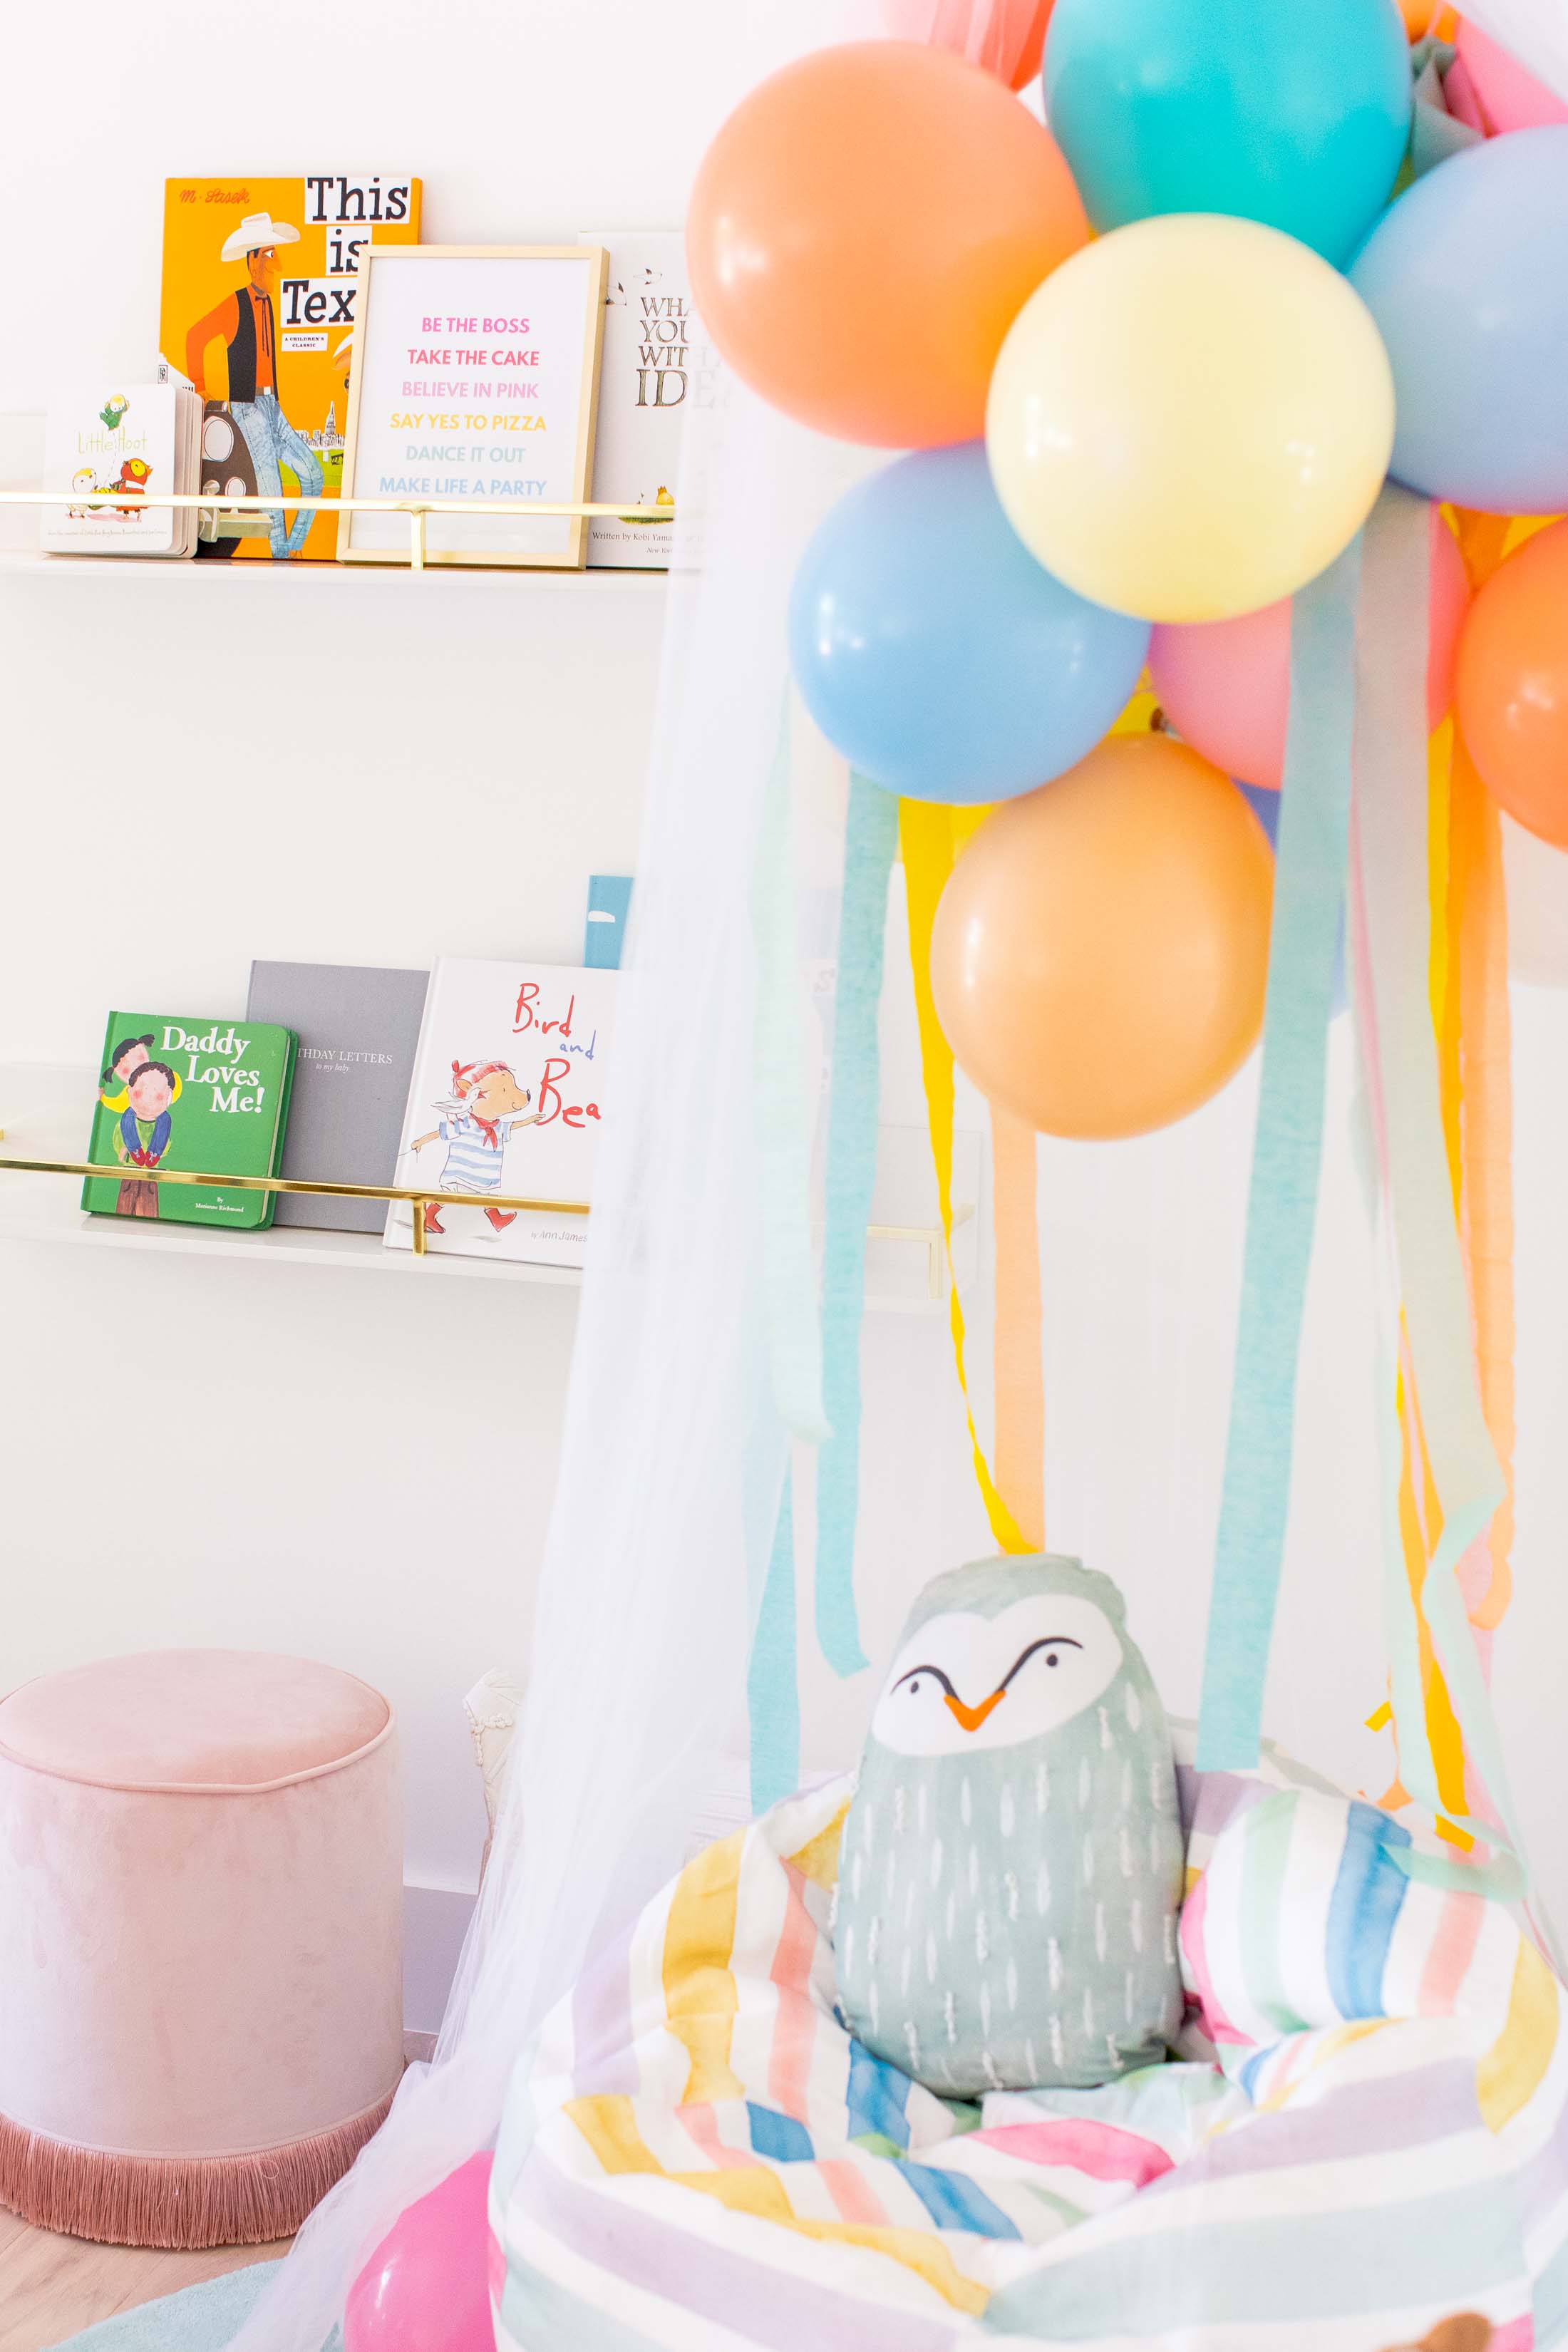 Sharing how to make this DIY book nook with a few colorful reading nook ideas to make it your own! #decor #kids #diy #reading by top Houston lifestyle blogger Ashley Rose of Sugar & Cloth